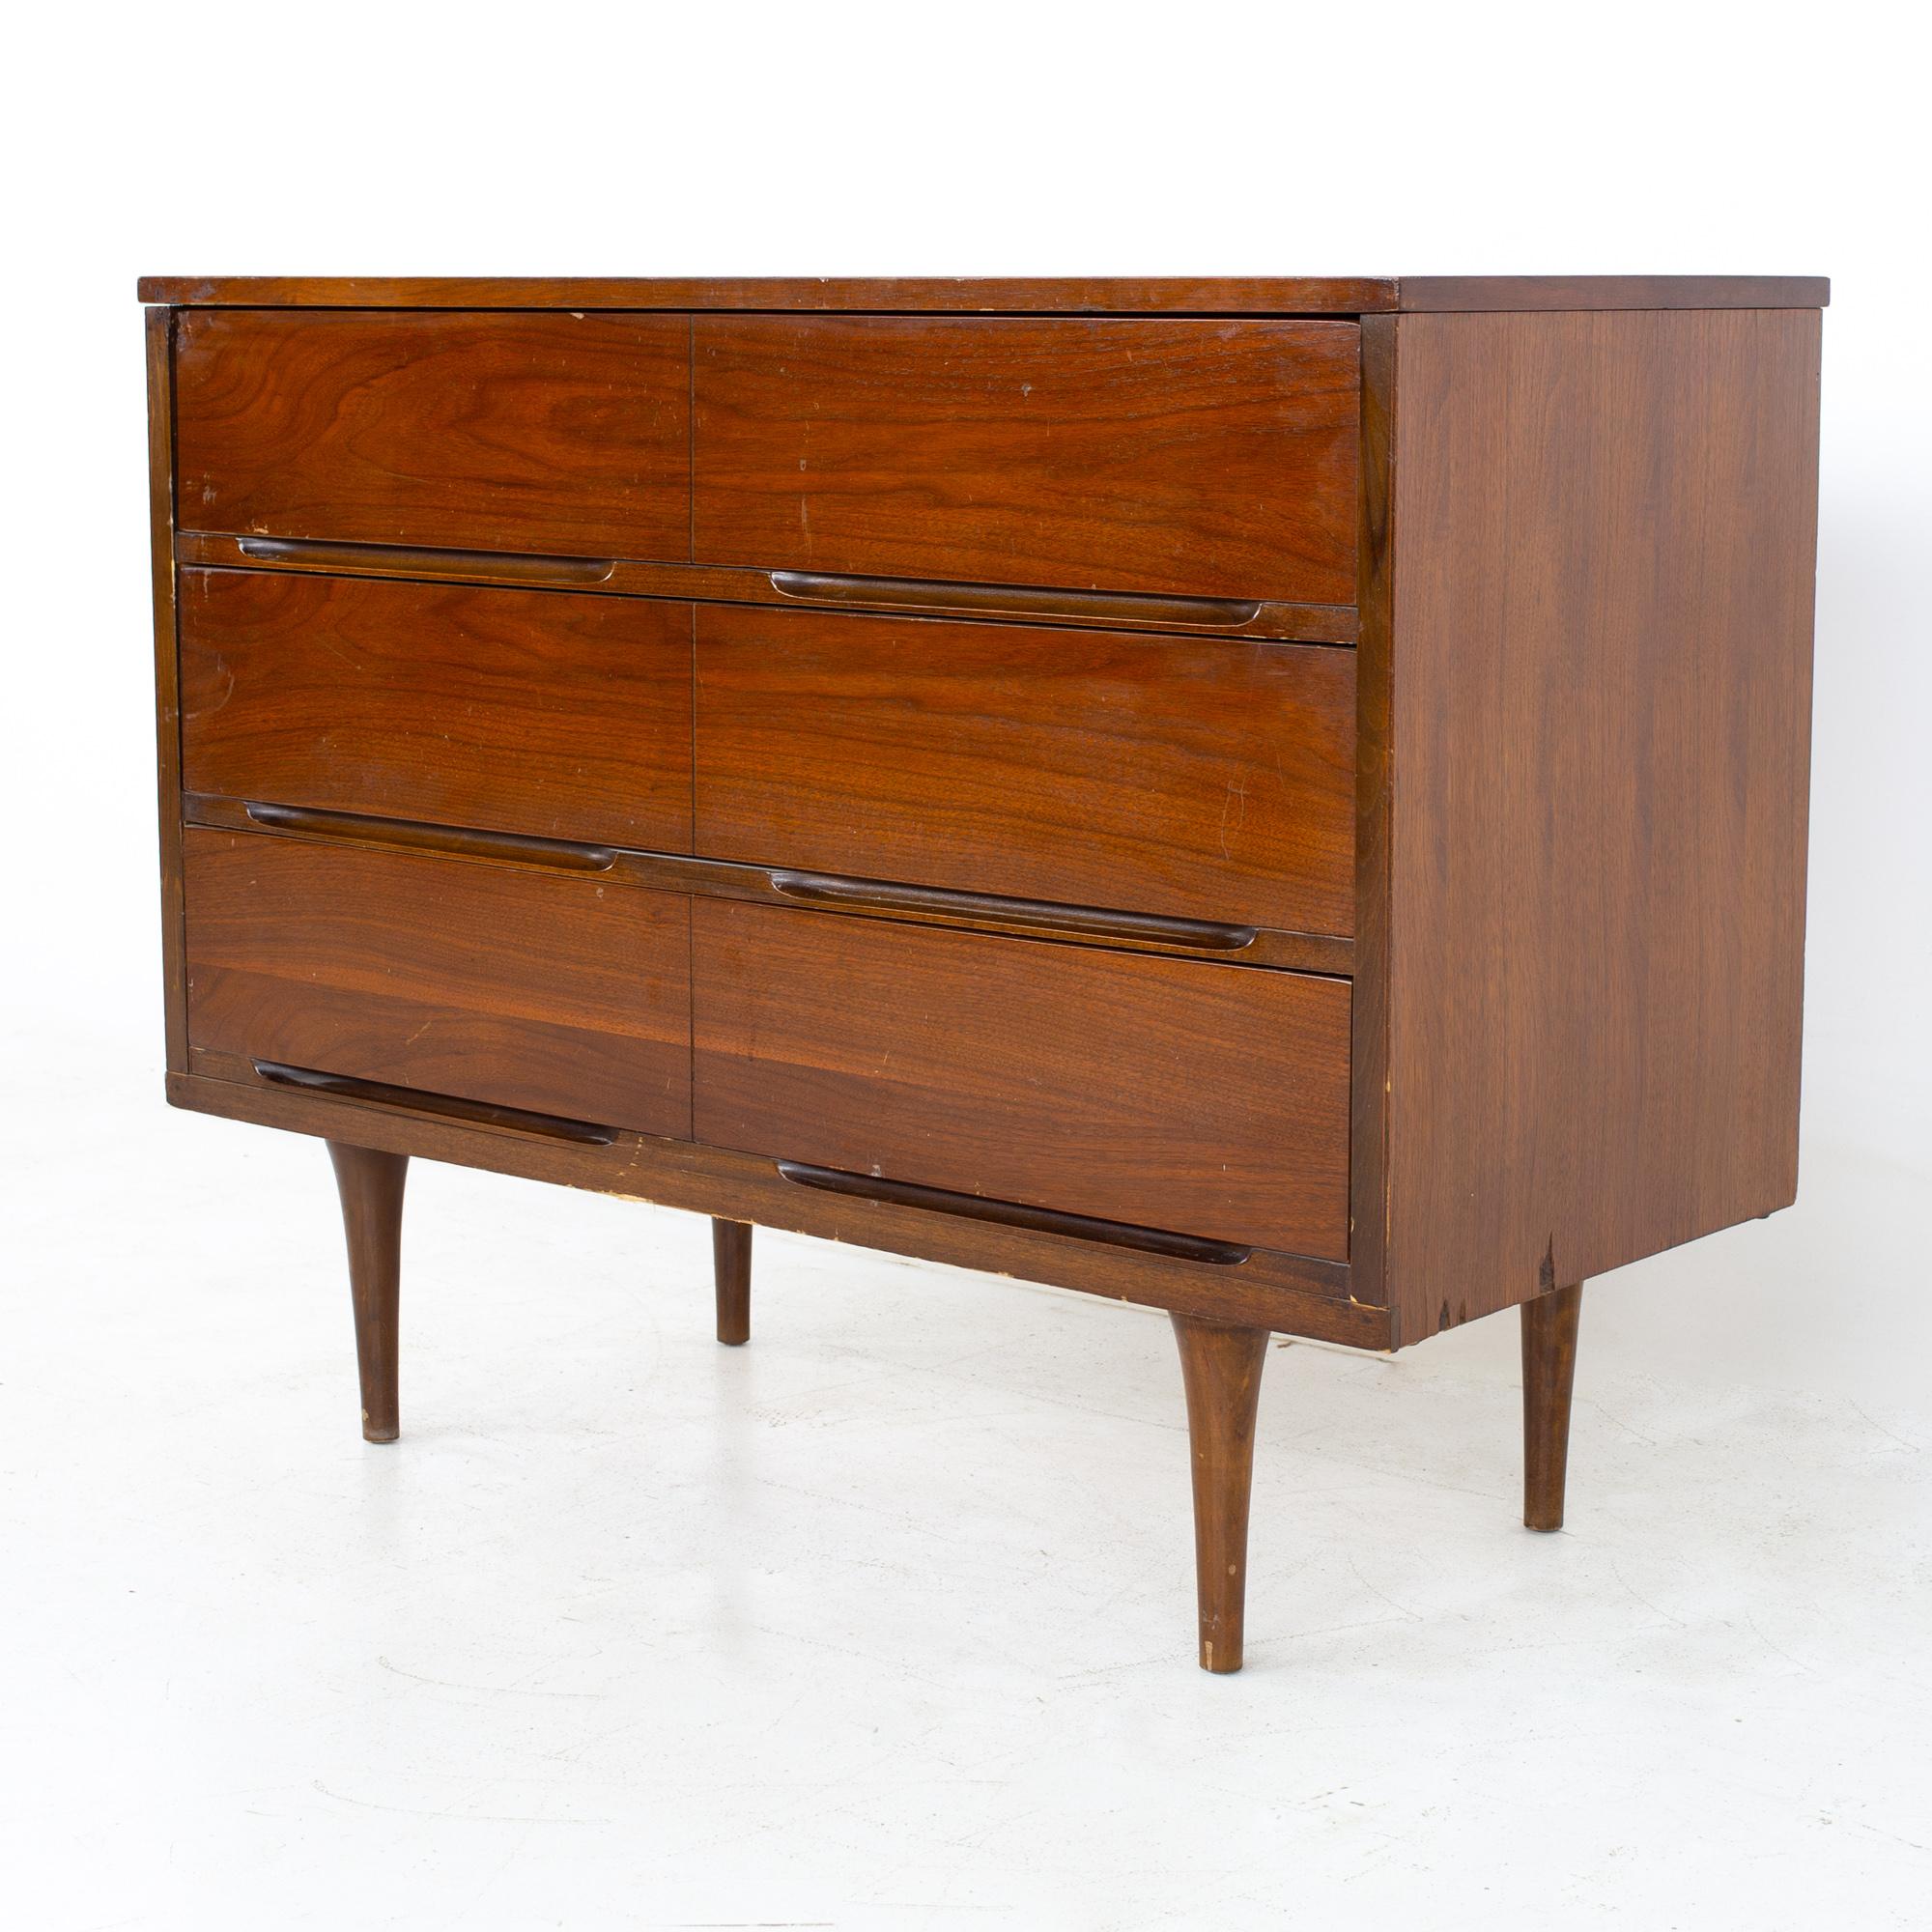 Mid century walnut 6 drawer lowboy dresser
Dresser measures: 40.25 wide x 17.75 deep x 31 inches high

All pieces of furniture can be had in what we call restored vintage condition. That means the piece is restored upon purchase so it’s free of